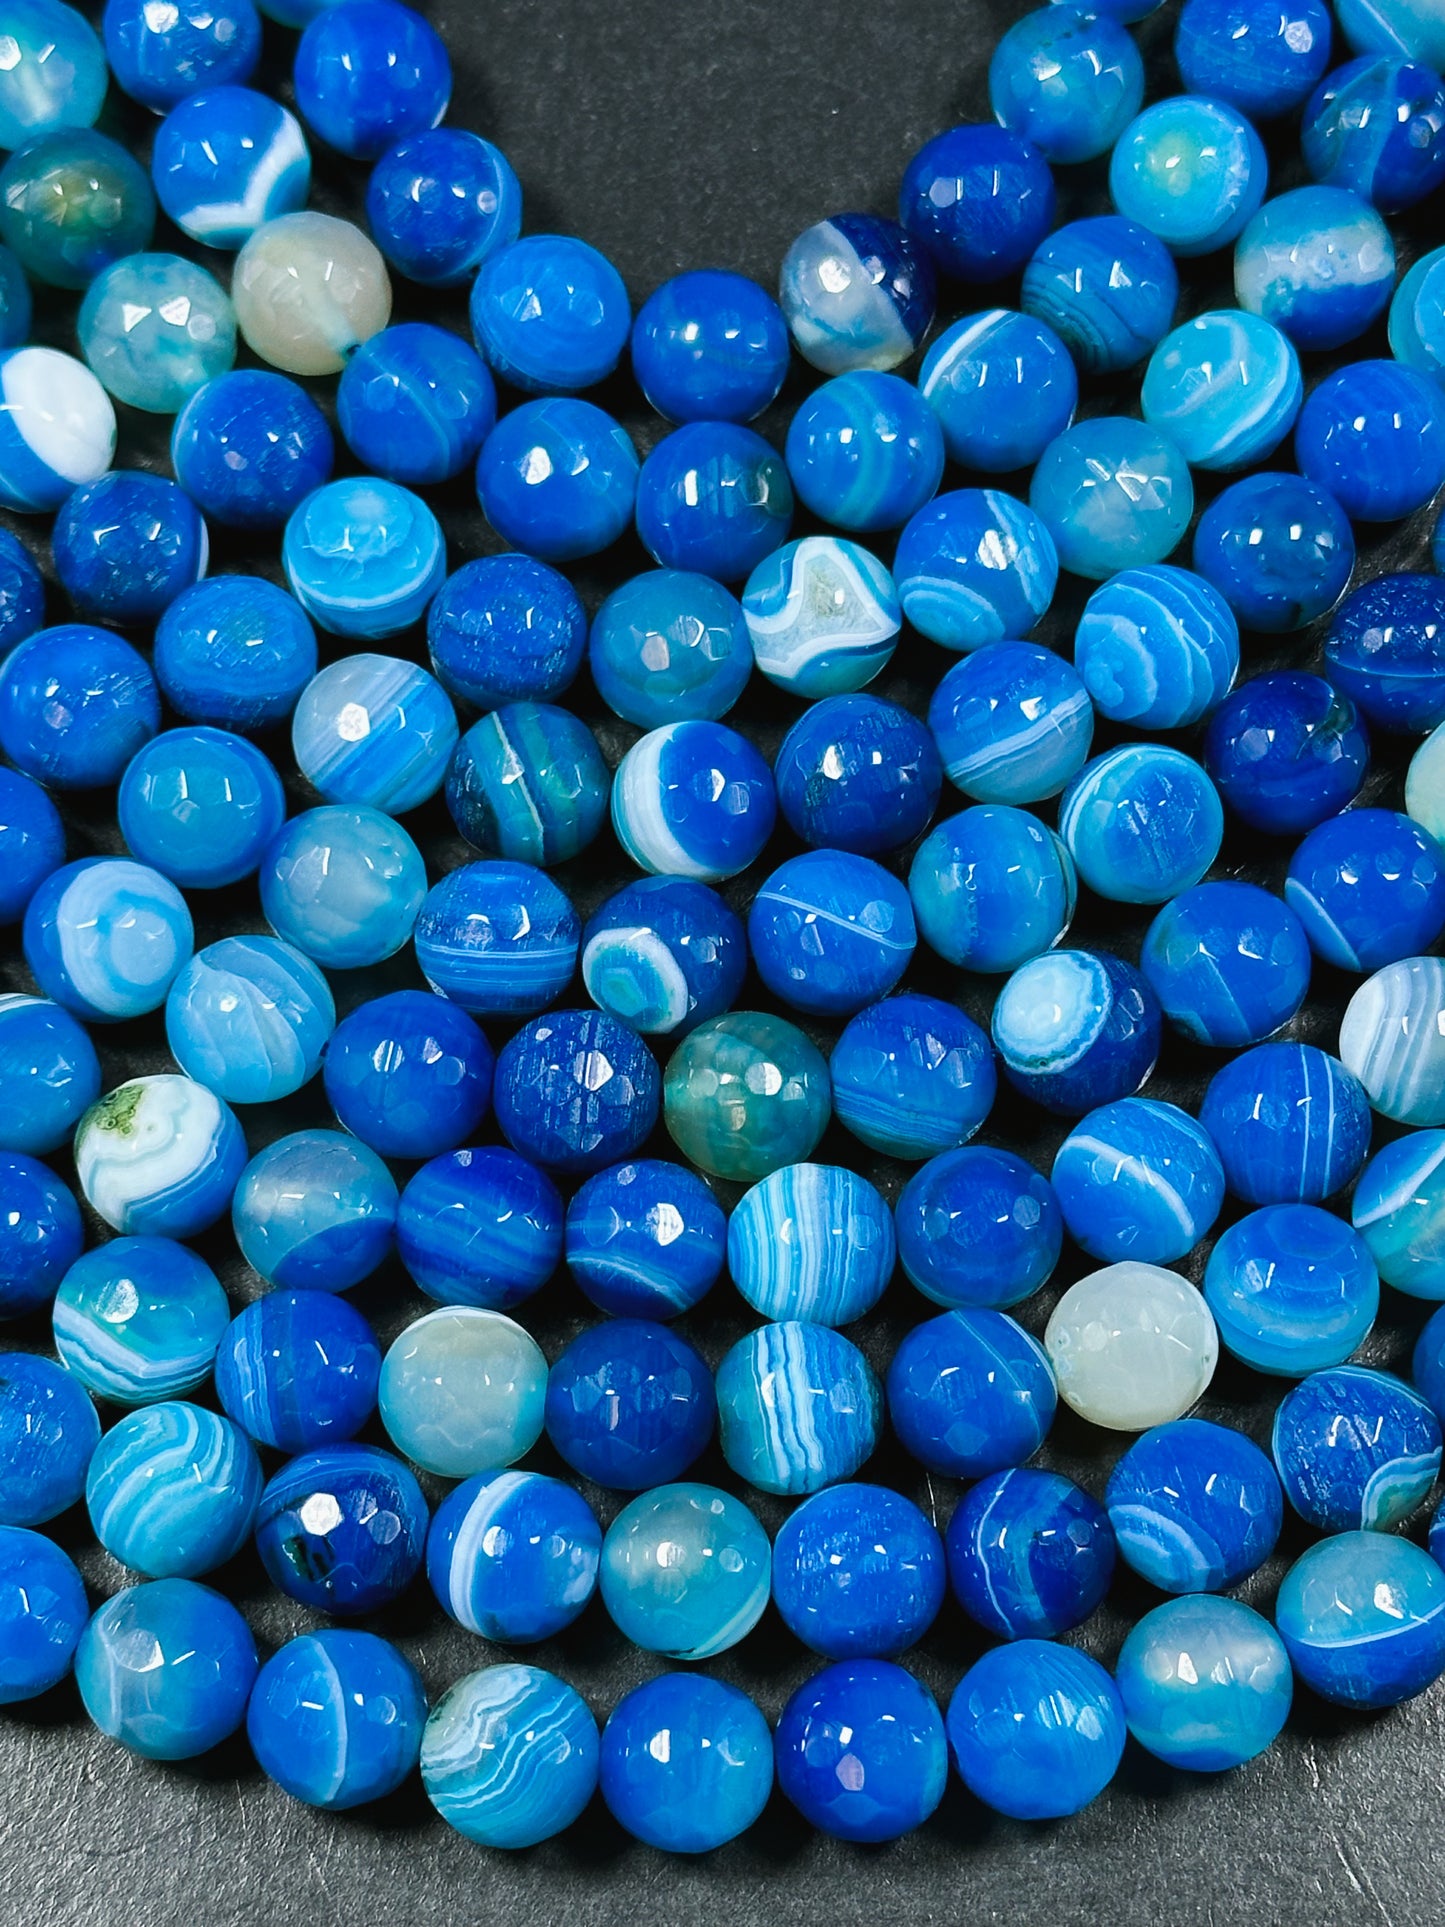 NATURAL Botswana Agate Gemstone Bead Faceted 6mm 8mm 10mm 12mm Round Beads, Beautiful Blue Color Gemstone Bead Full Strand 15.5"